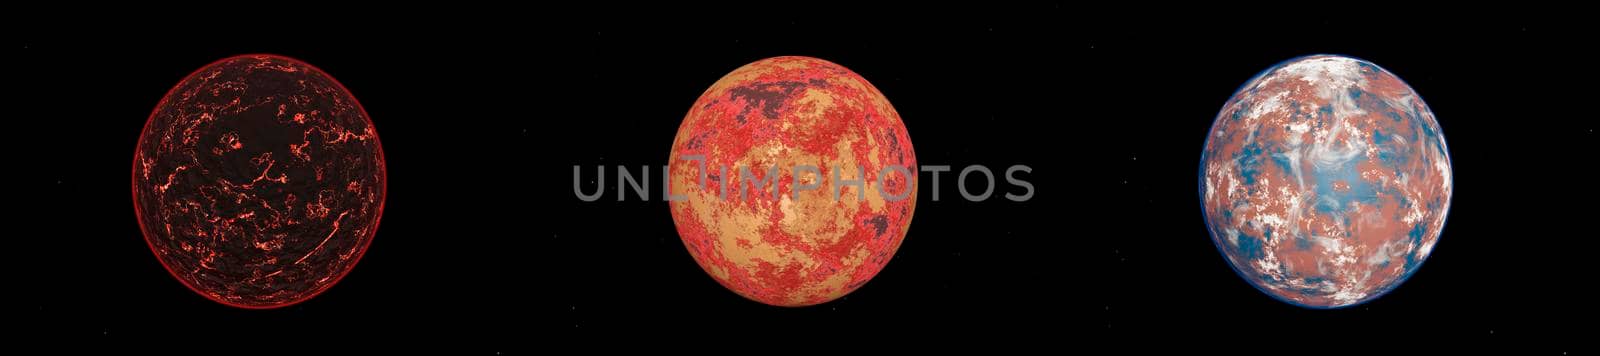 This image represent a generic lava planet or earth formation. It is a realistic 3d illustration